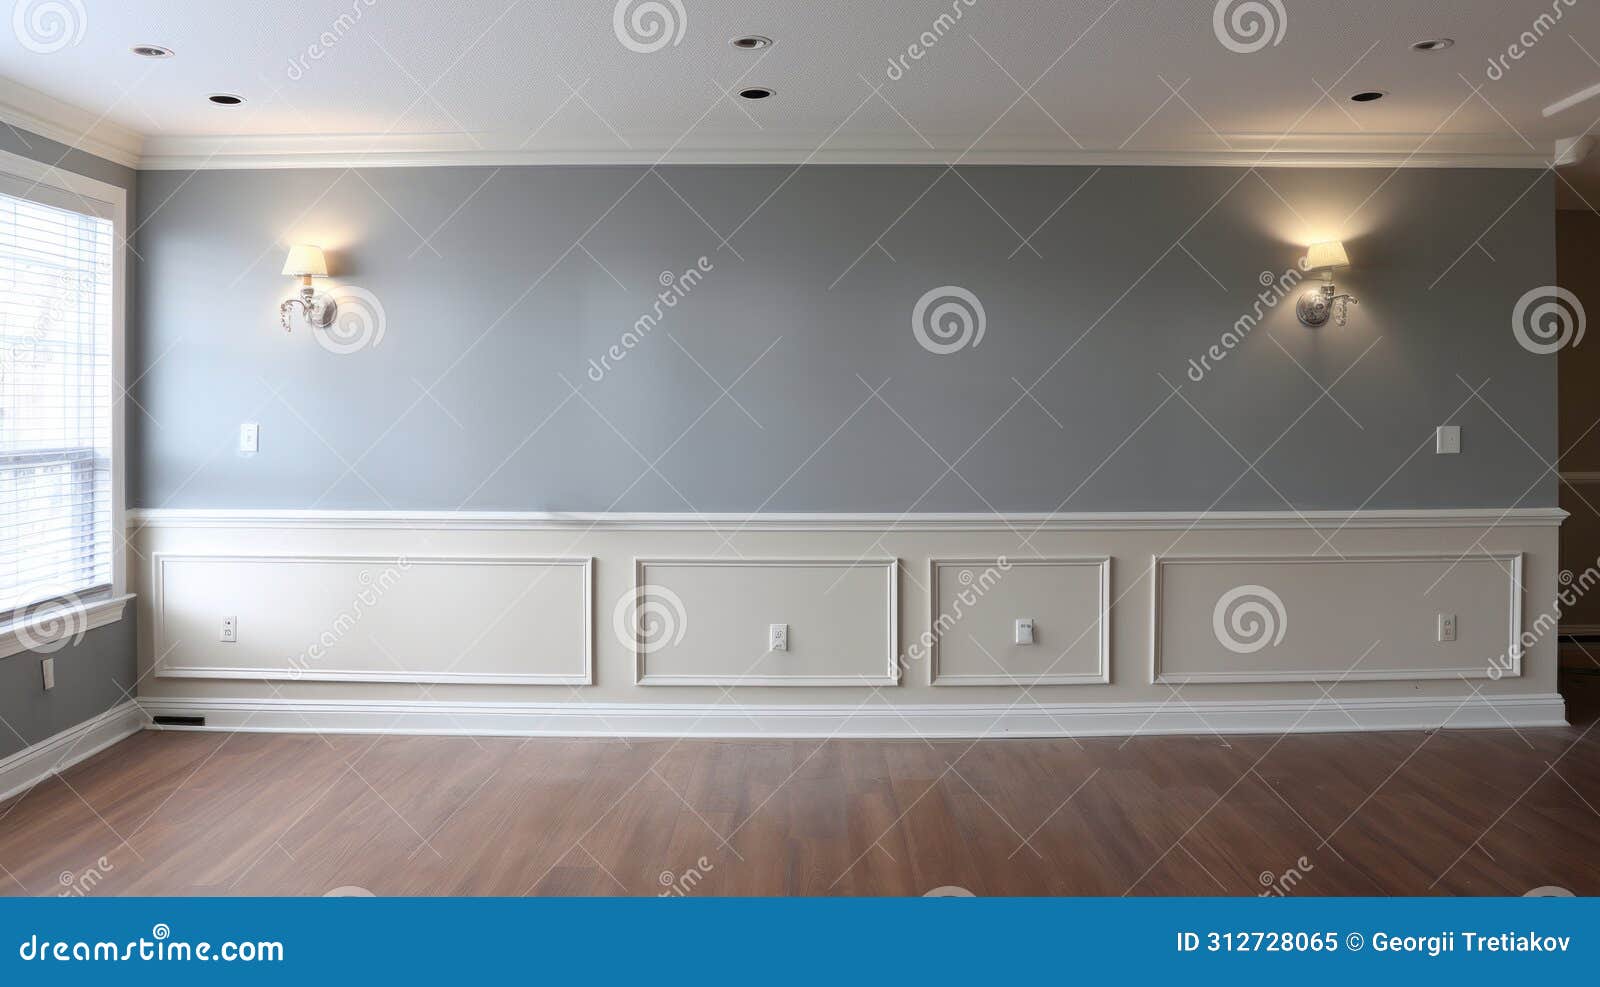 elegant interior wall with wainscoting and wall sconces